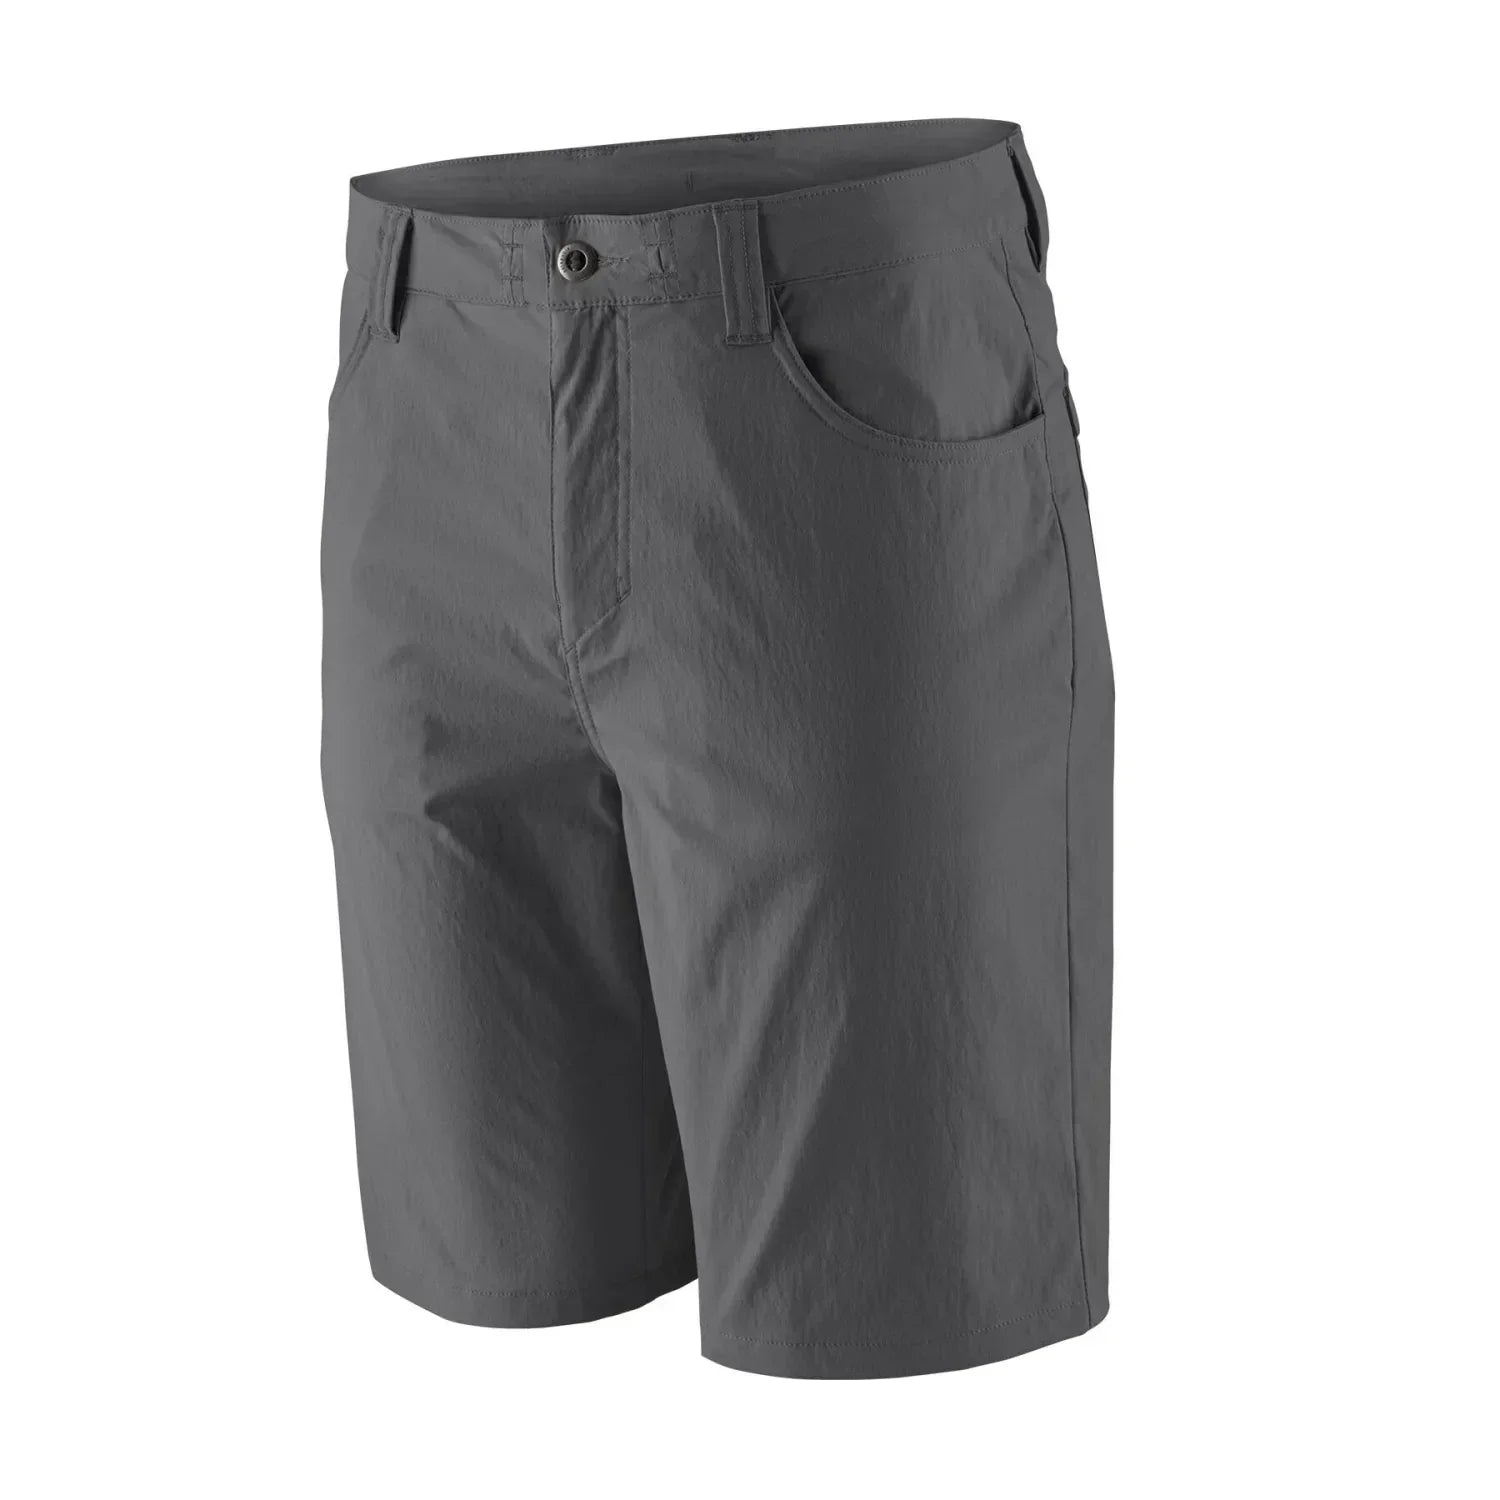 Patagonia 05. M. SPORTSWEAR - M. SYNTHETIC SHORT Men's Quandary Short - 8 in FGE FORGE GREY